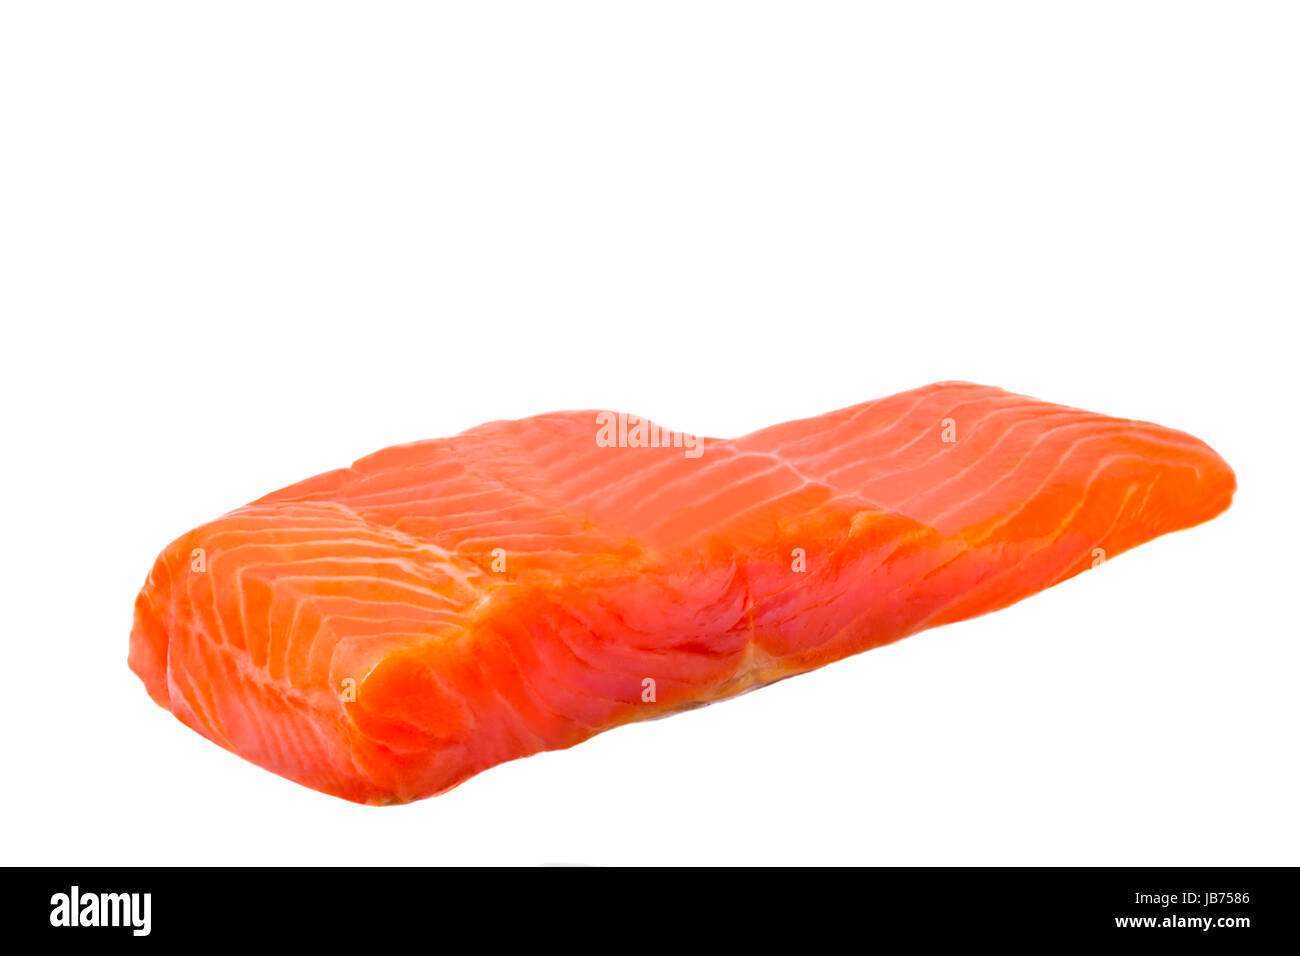 A piece of fillet of trout. Photographed close-up on a white background. Stock Photo